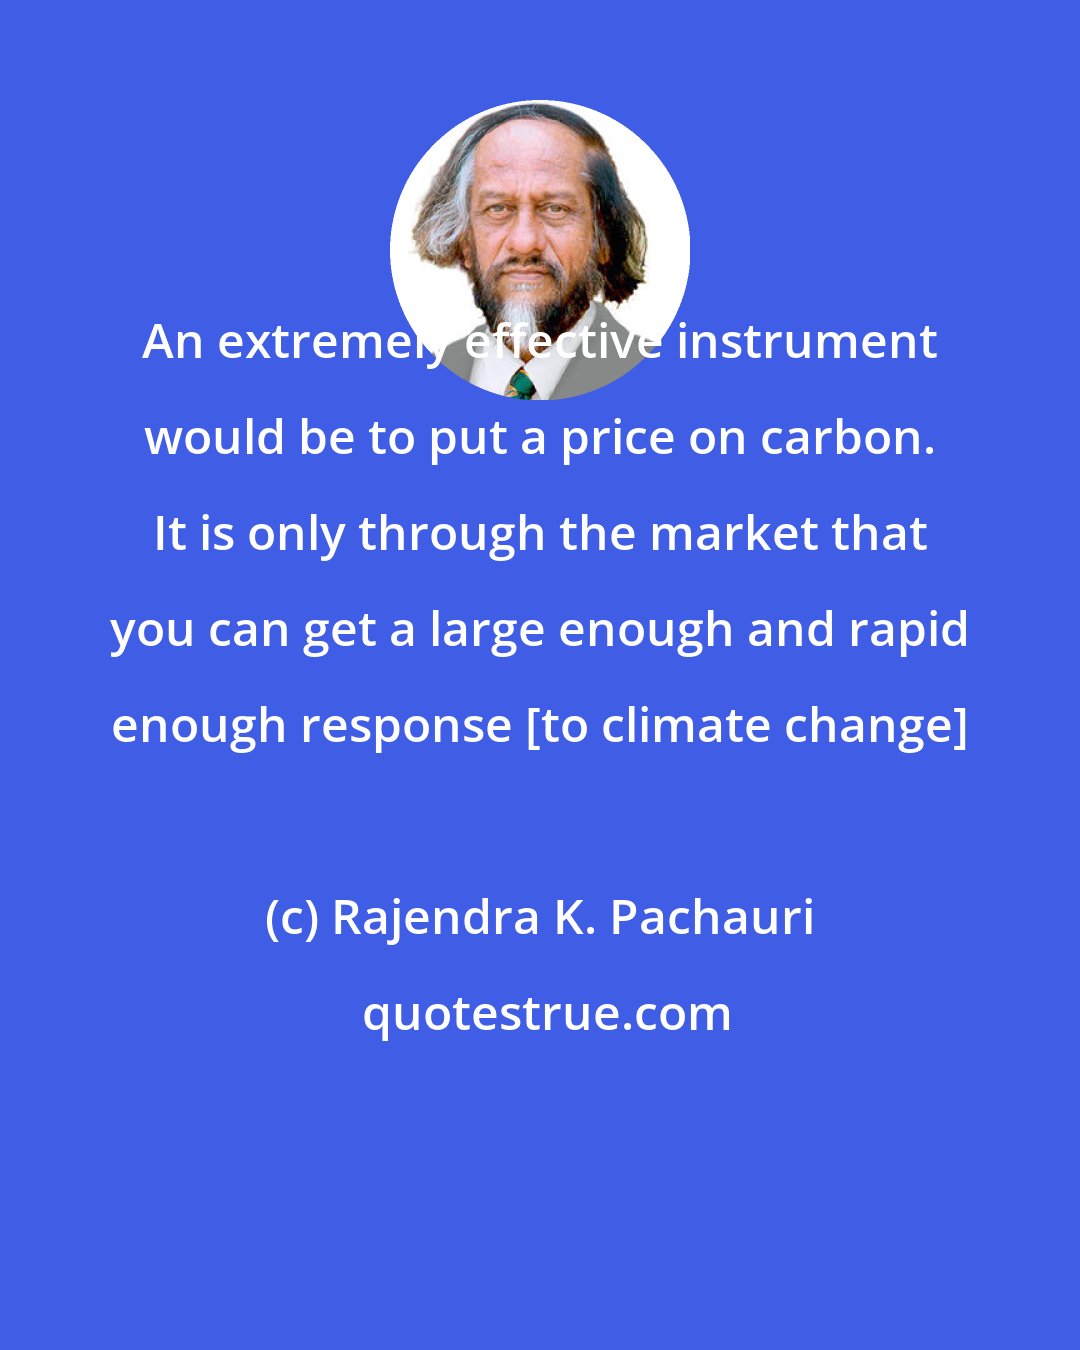 Rajendra K. Pachauri: An extremely effective instrument would be to put a price on carbon. It is only through the market that you can get a large enough and rapid enough response [to climate change]